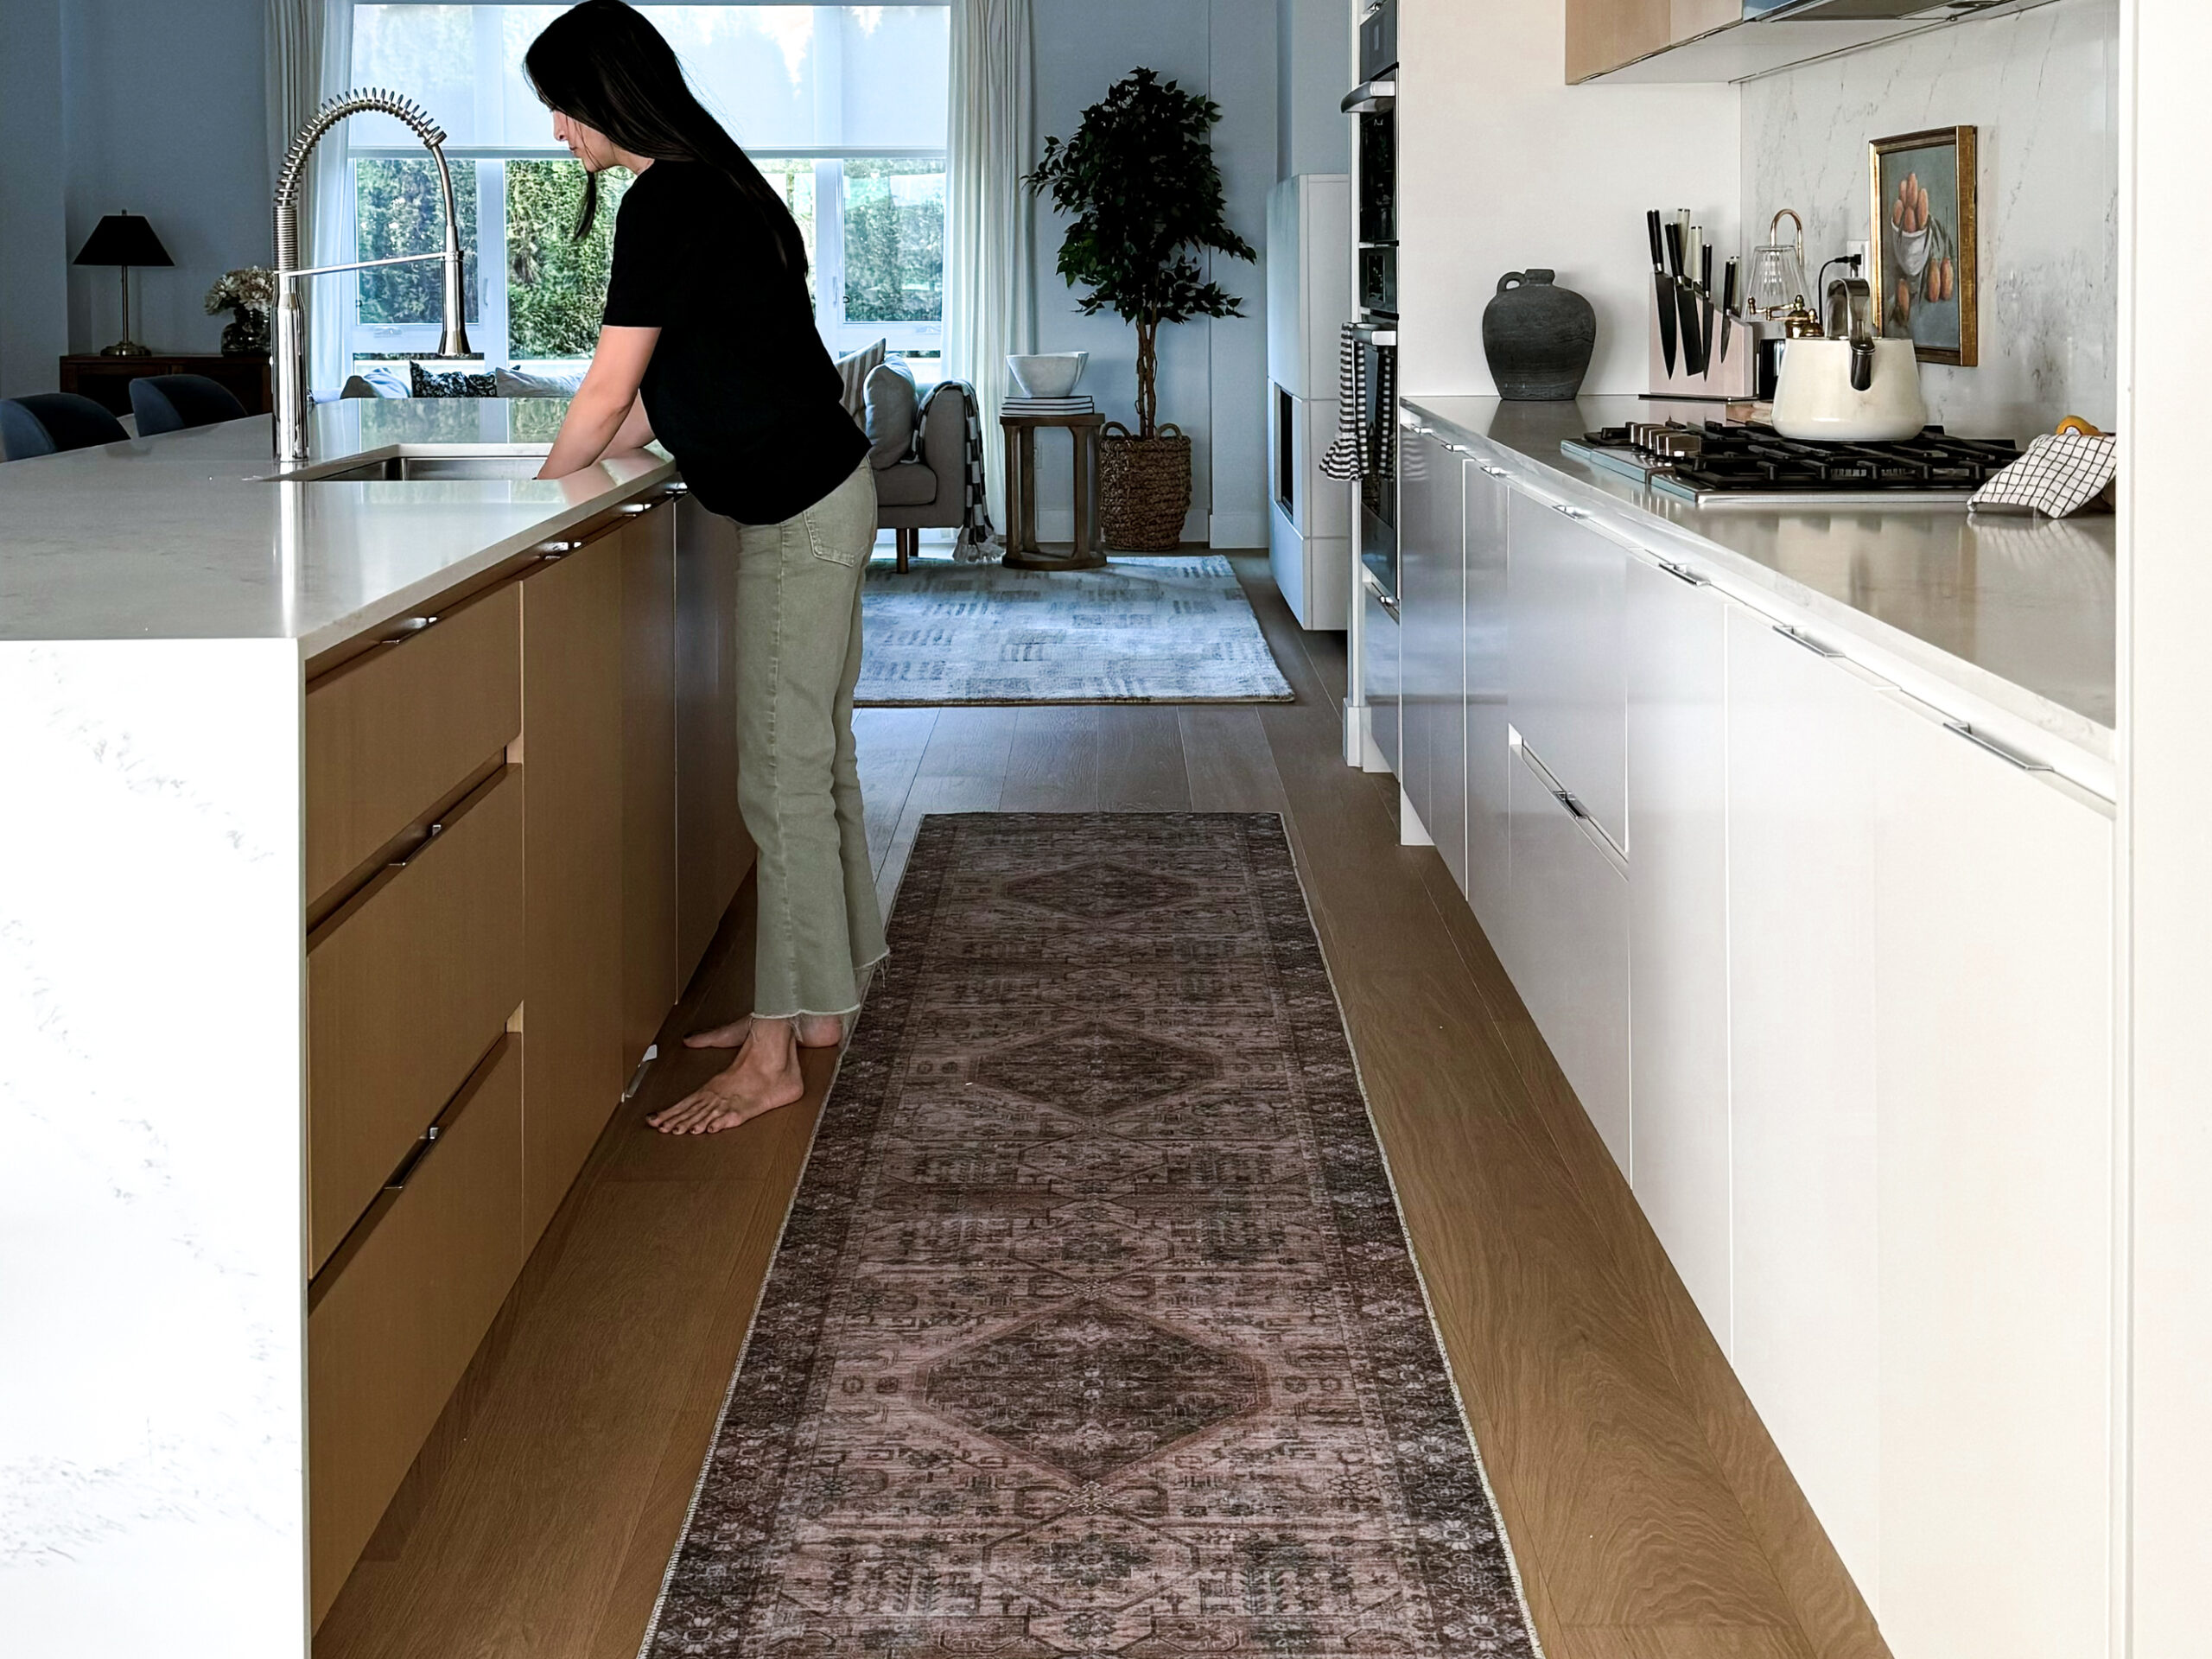 RugsUSA review - a beautiful rugs USA rug in the kitchen as a runner.